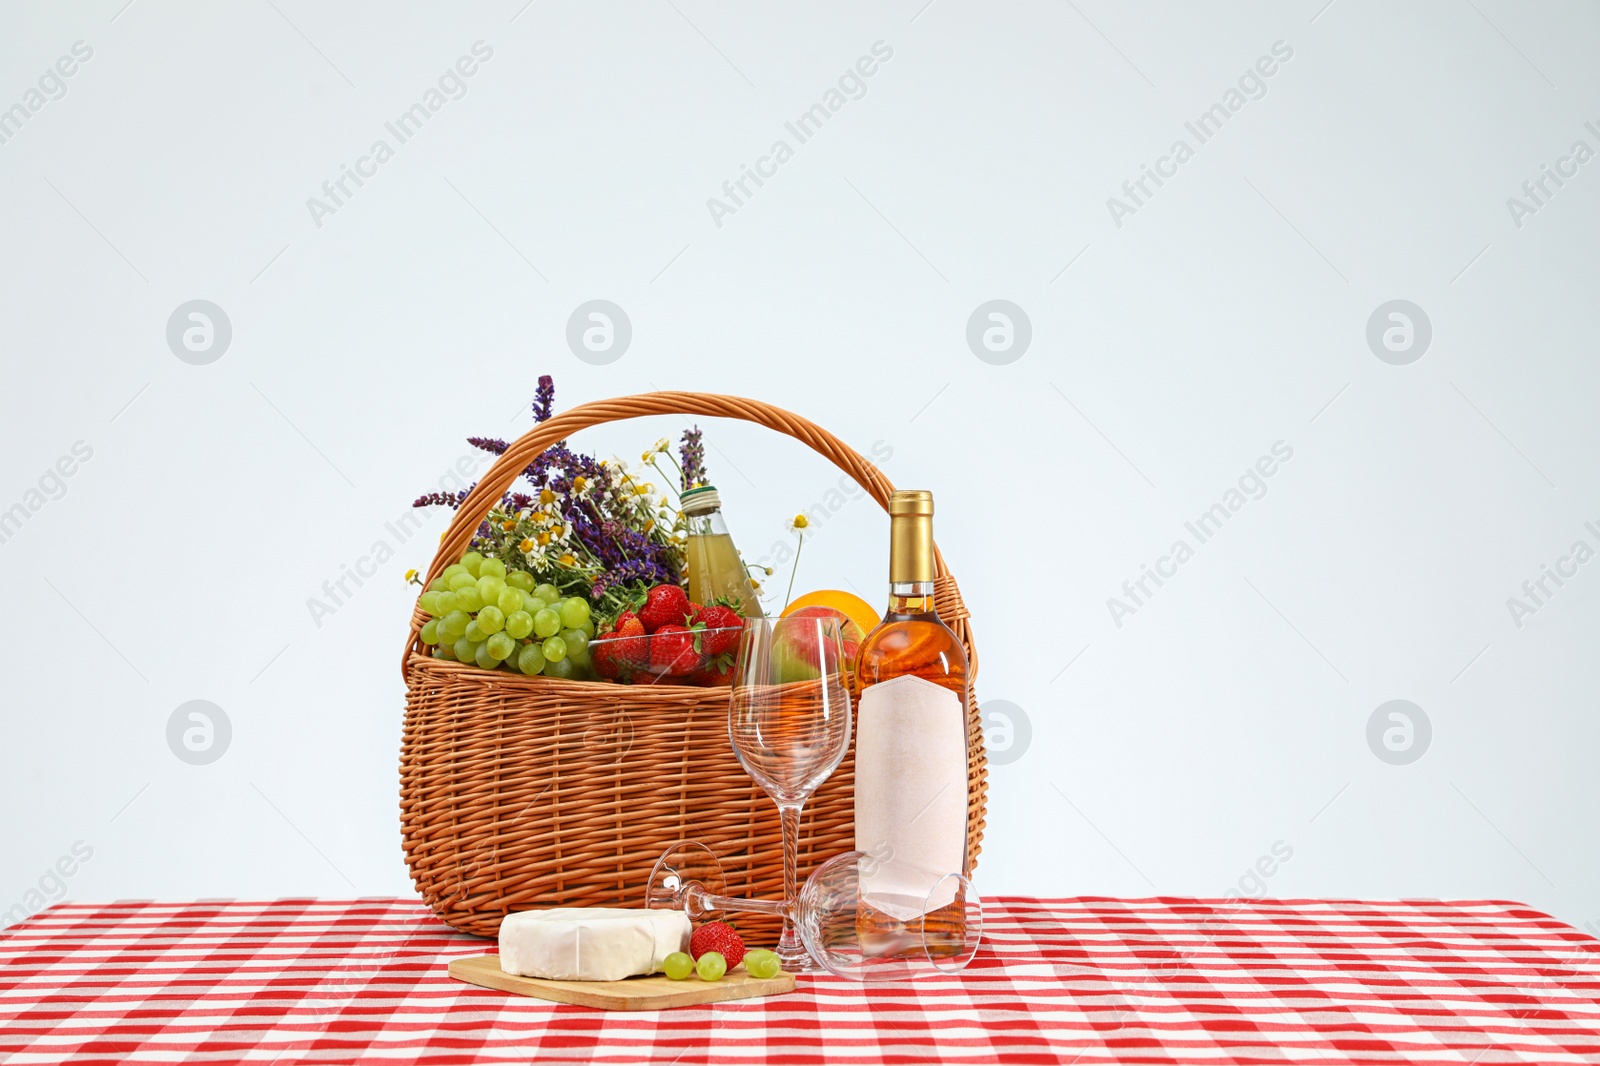 Photo of Picnic basket with wine and products on checkered tablecloth against white background